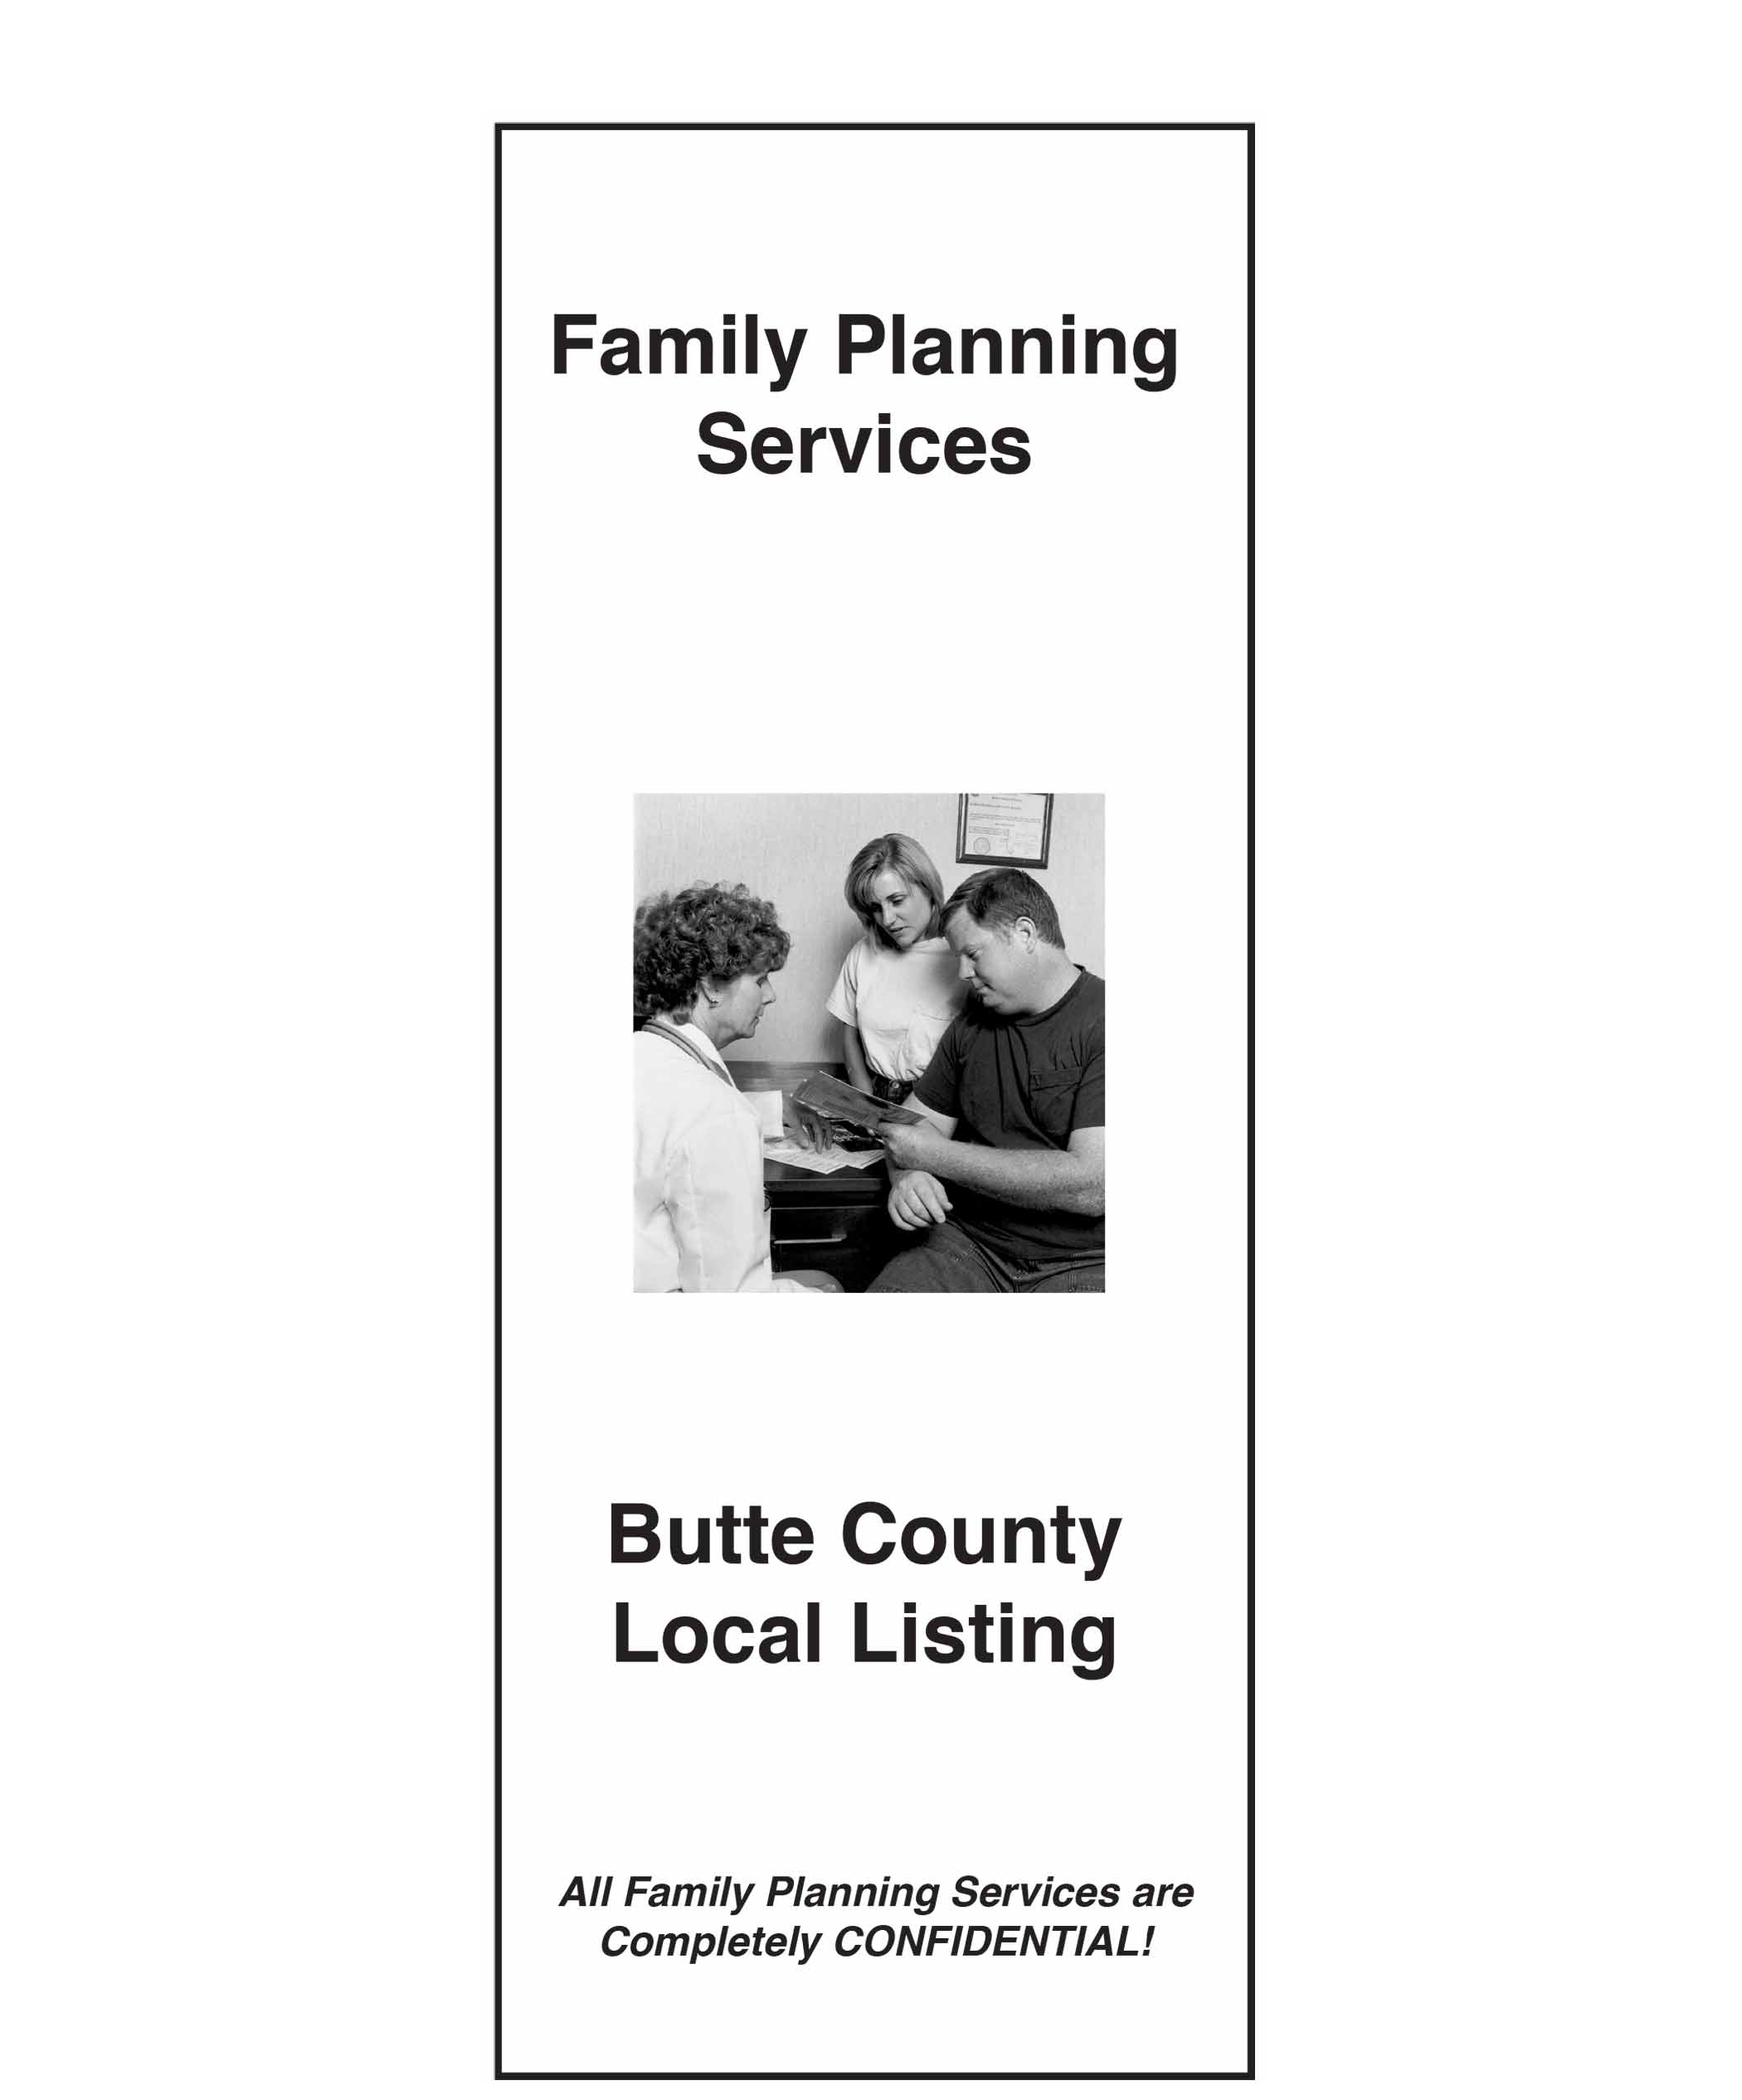 Family Planning Services Local Listing sample cover